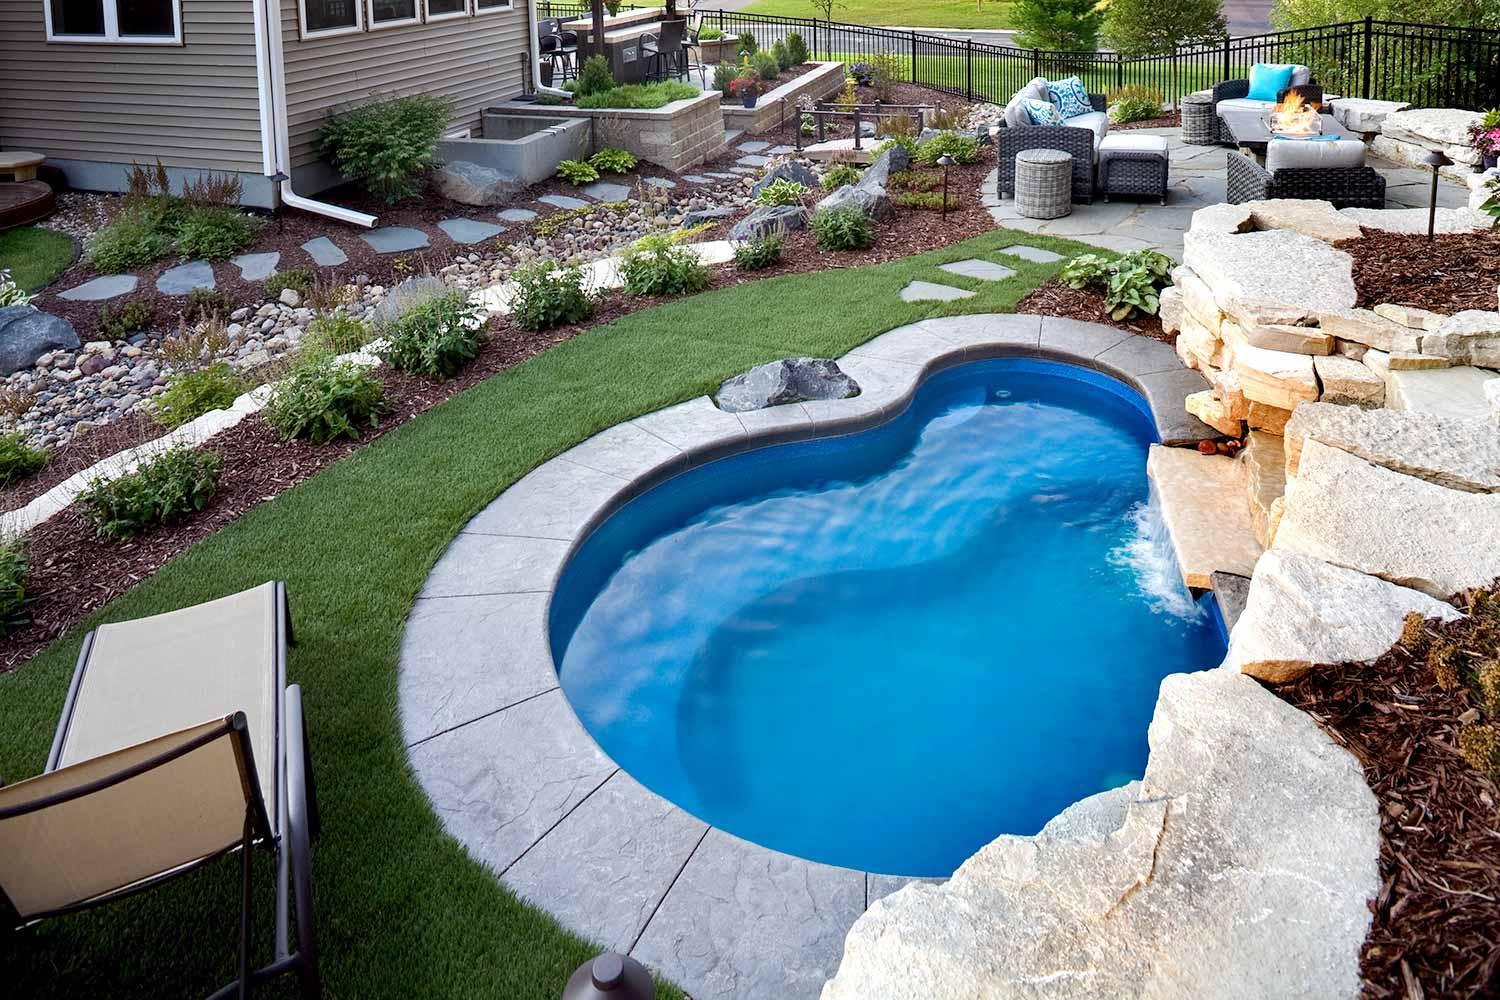 Small plunge pool surrounded by artificial turf.